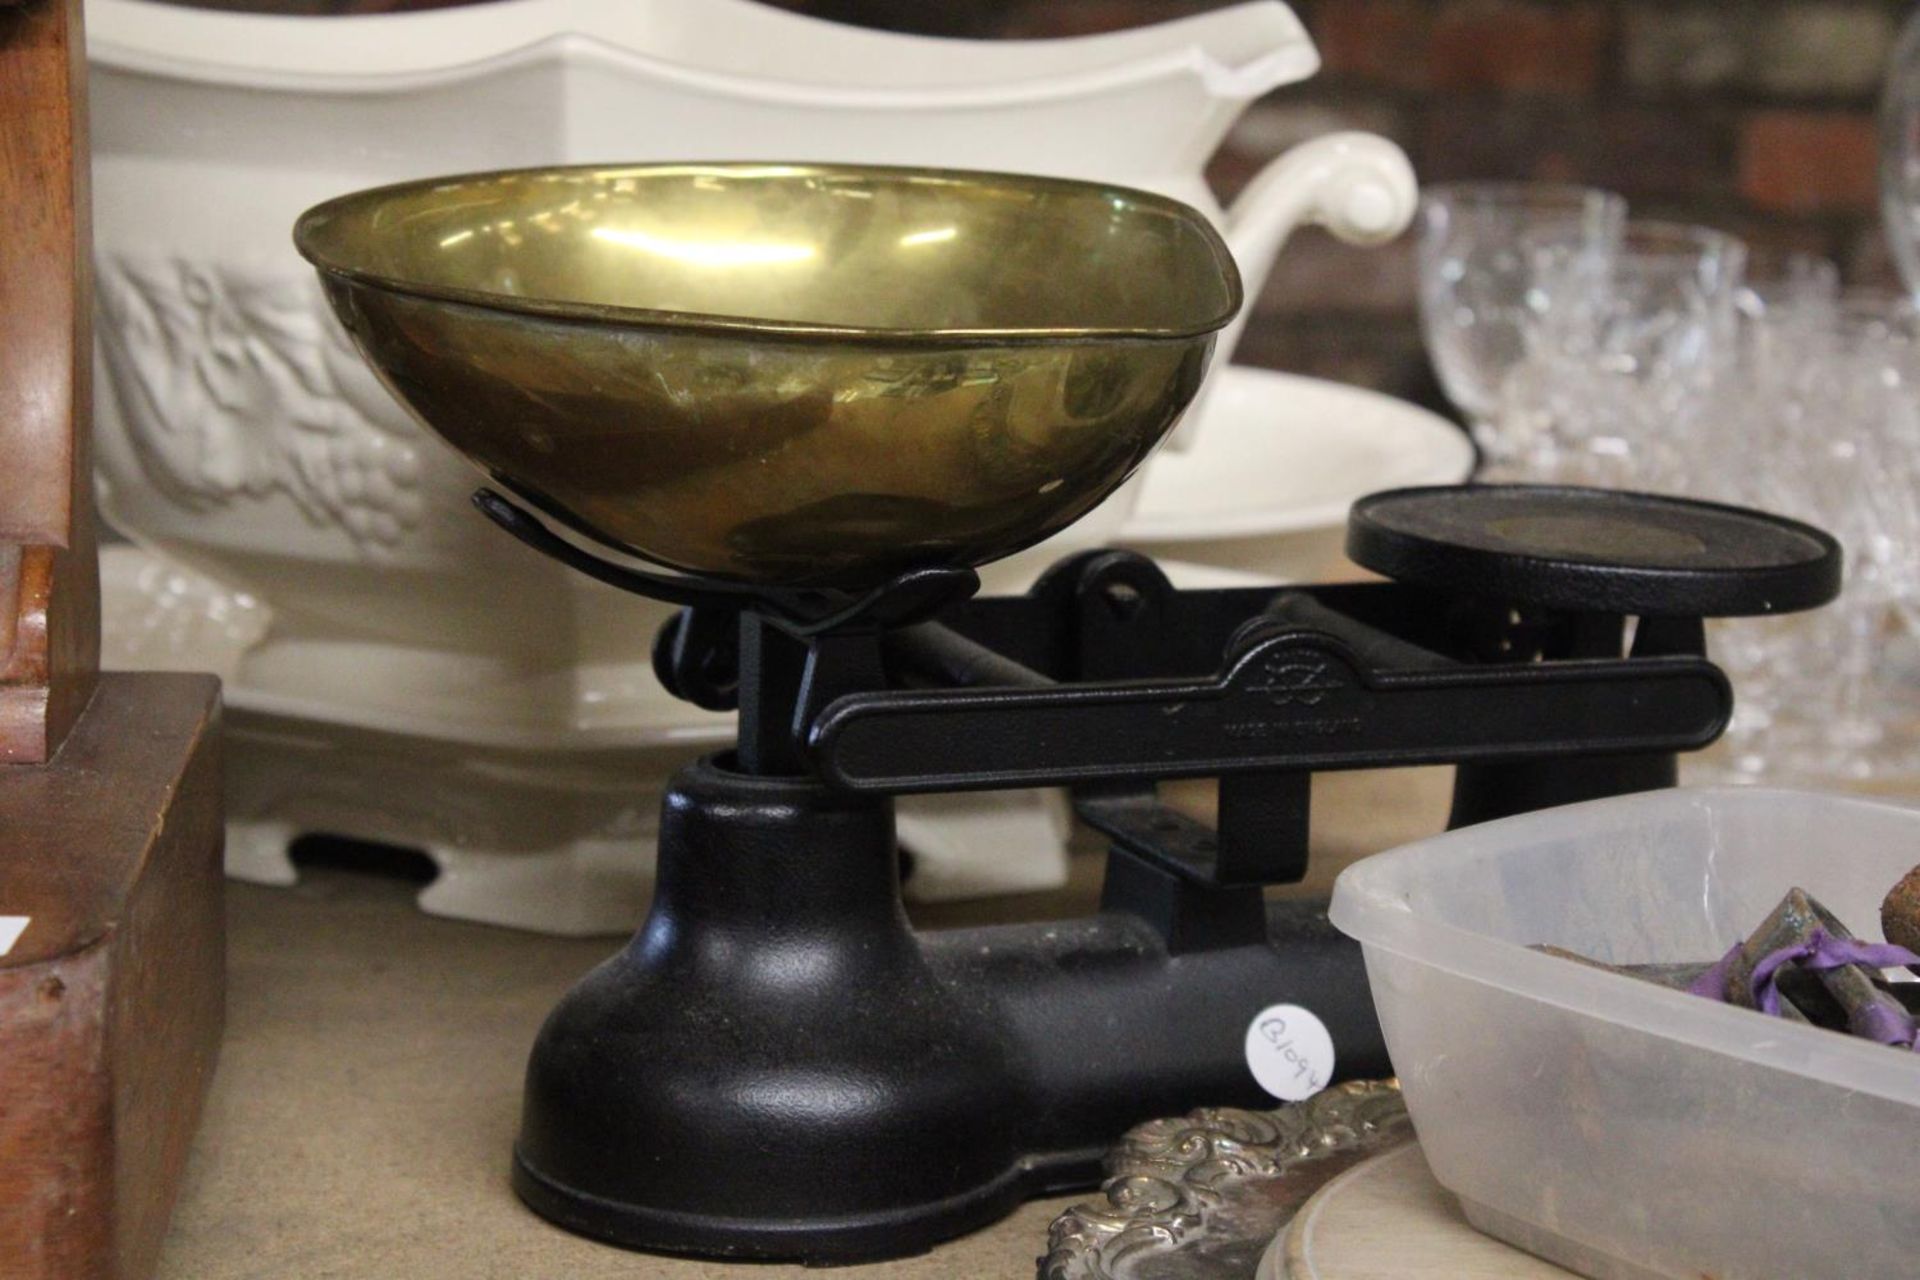 A SET OF TRADITIONAL "SALTER" BLACK VINTAGE KITCHEN SCALES PLUS A SILVER PLATED SHALLOW BOWL WITH - Image 2 of 4